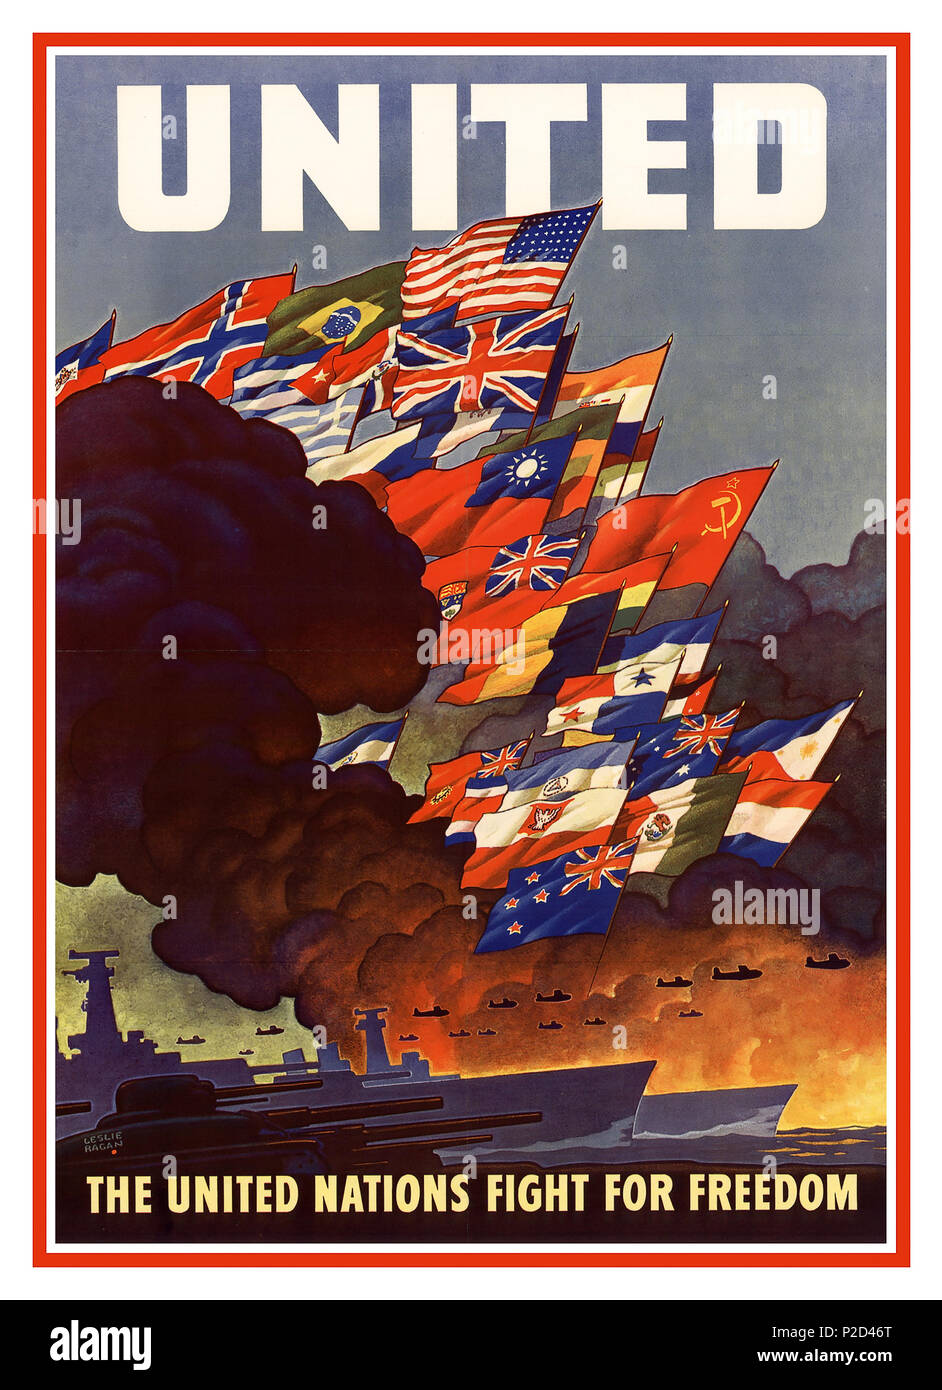 United Nations Ww2 Poster